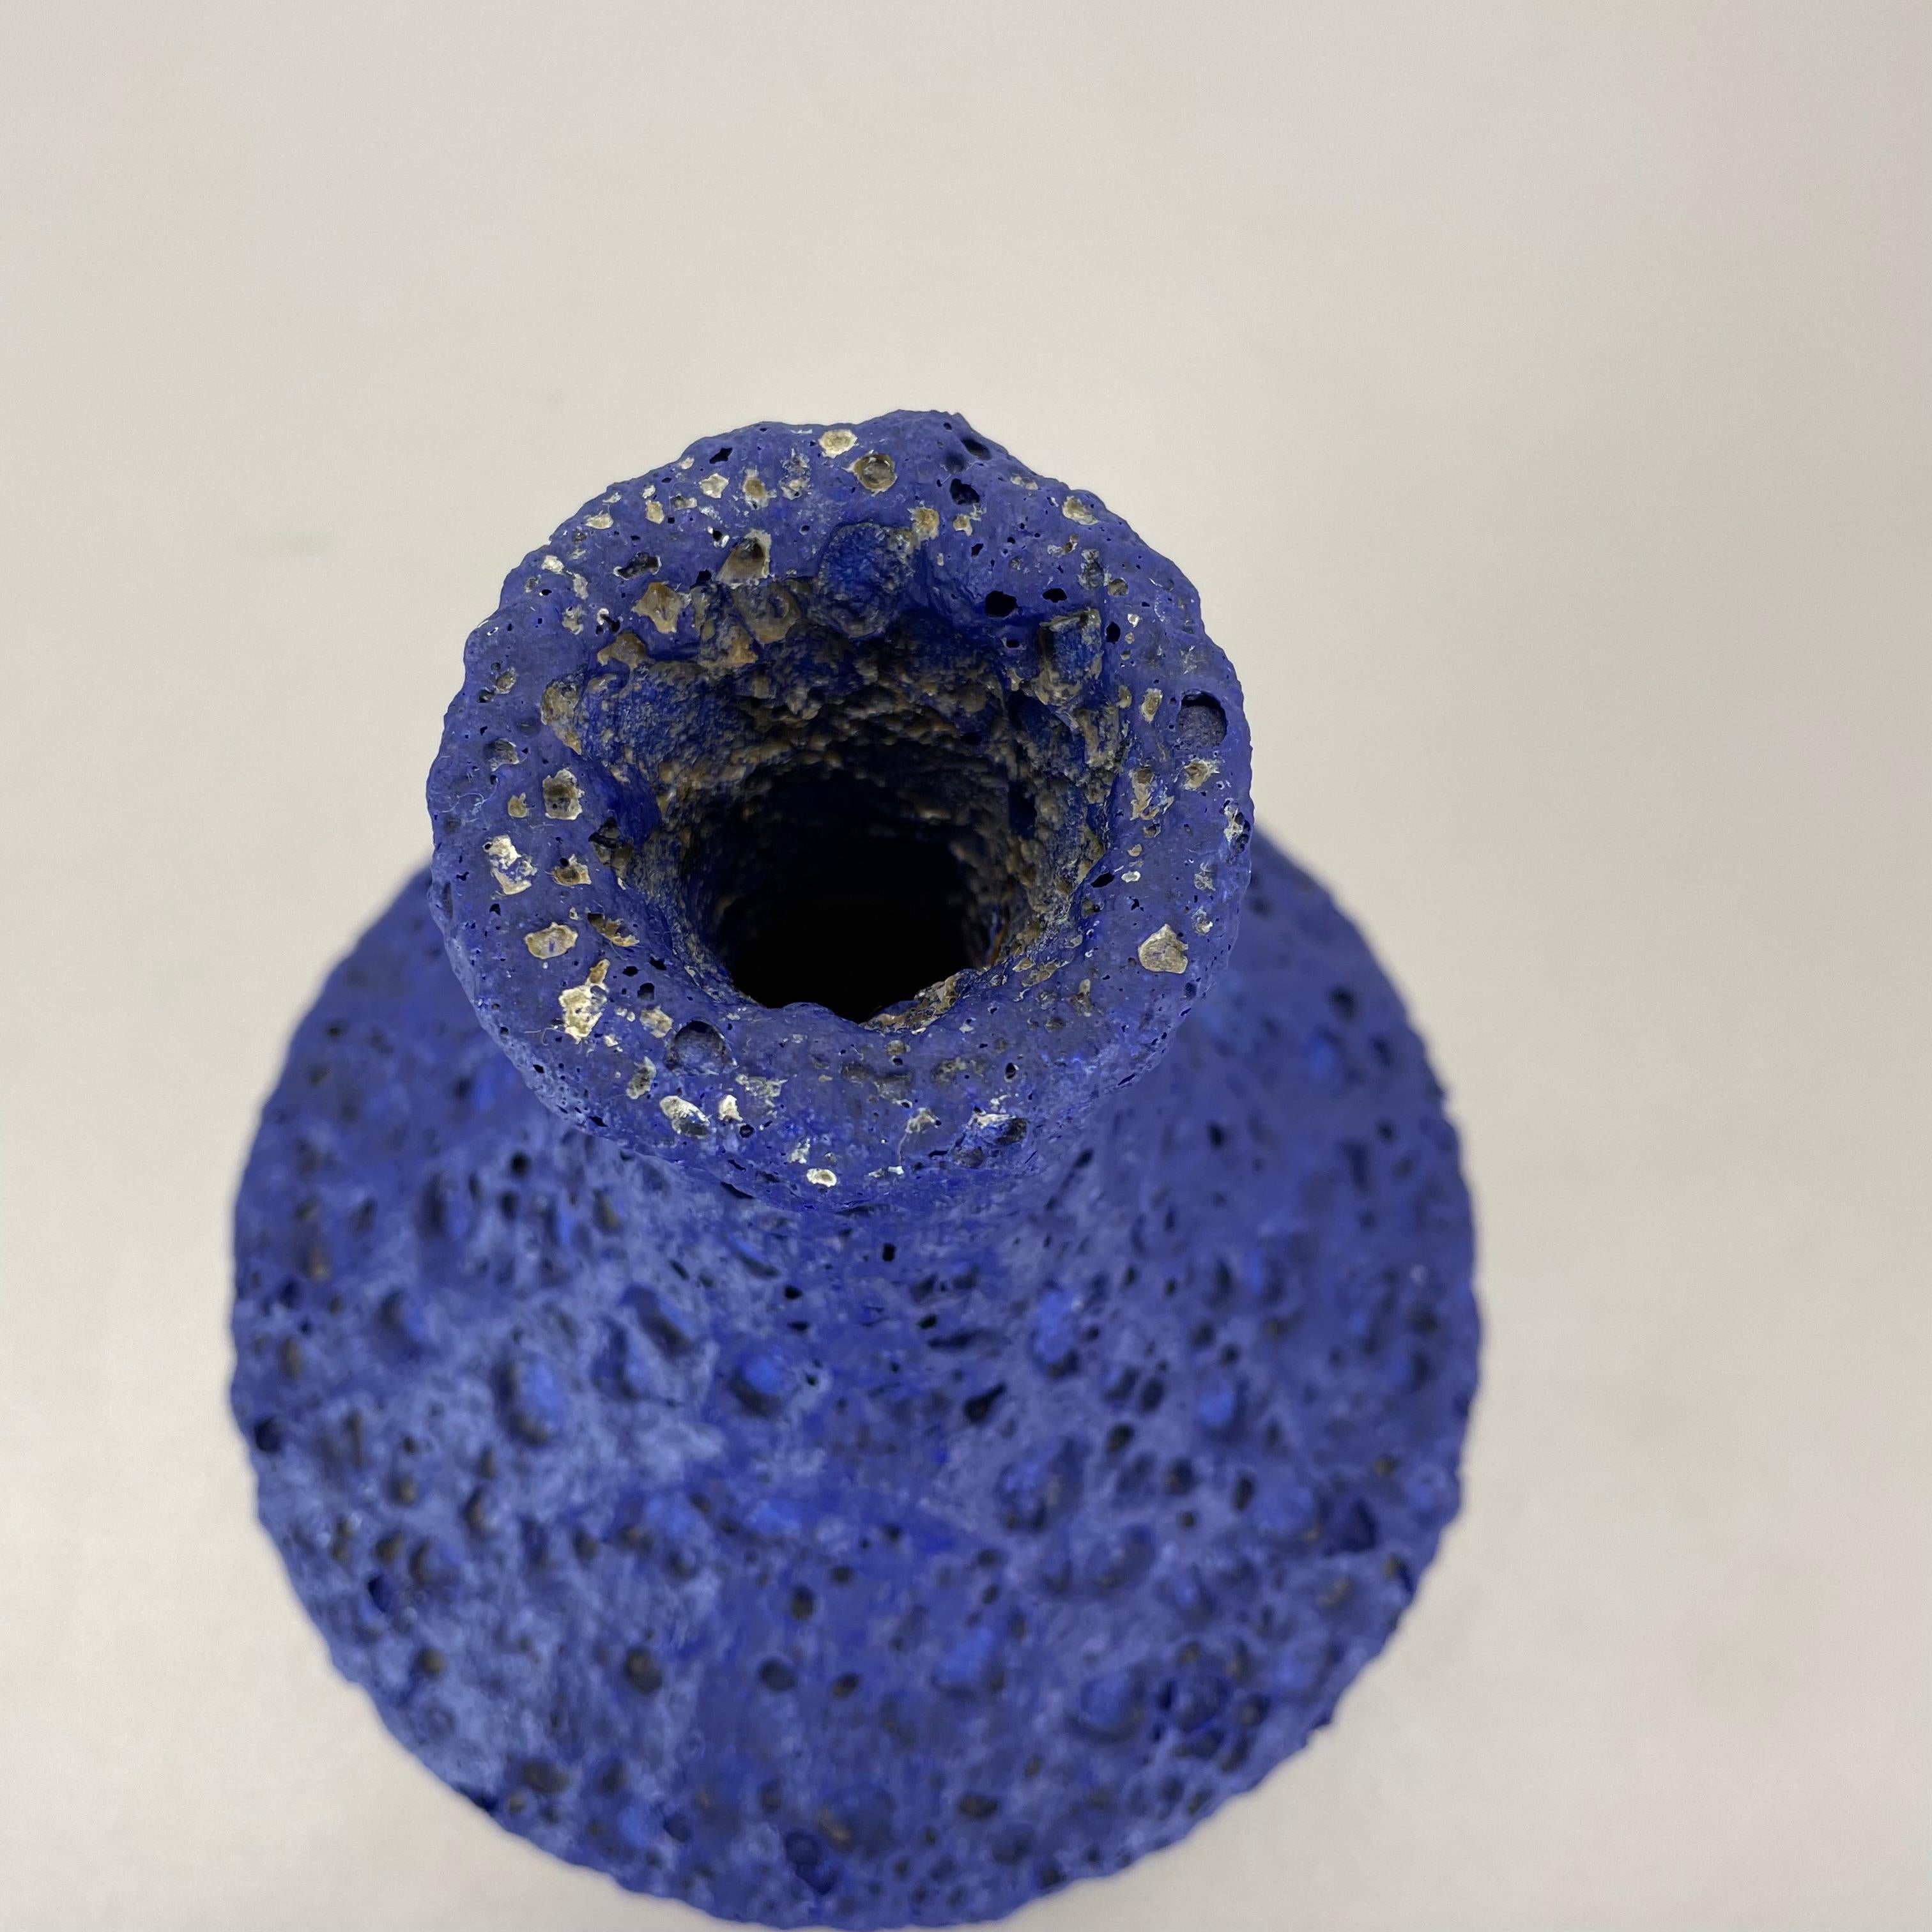 Abstract Colorful Pottery Blue Brutalist Vase by Silberdistel, W. Germany, 1950s In Good Condition For Sale In Kirchlengern, DE